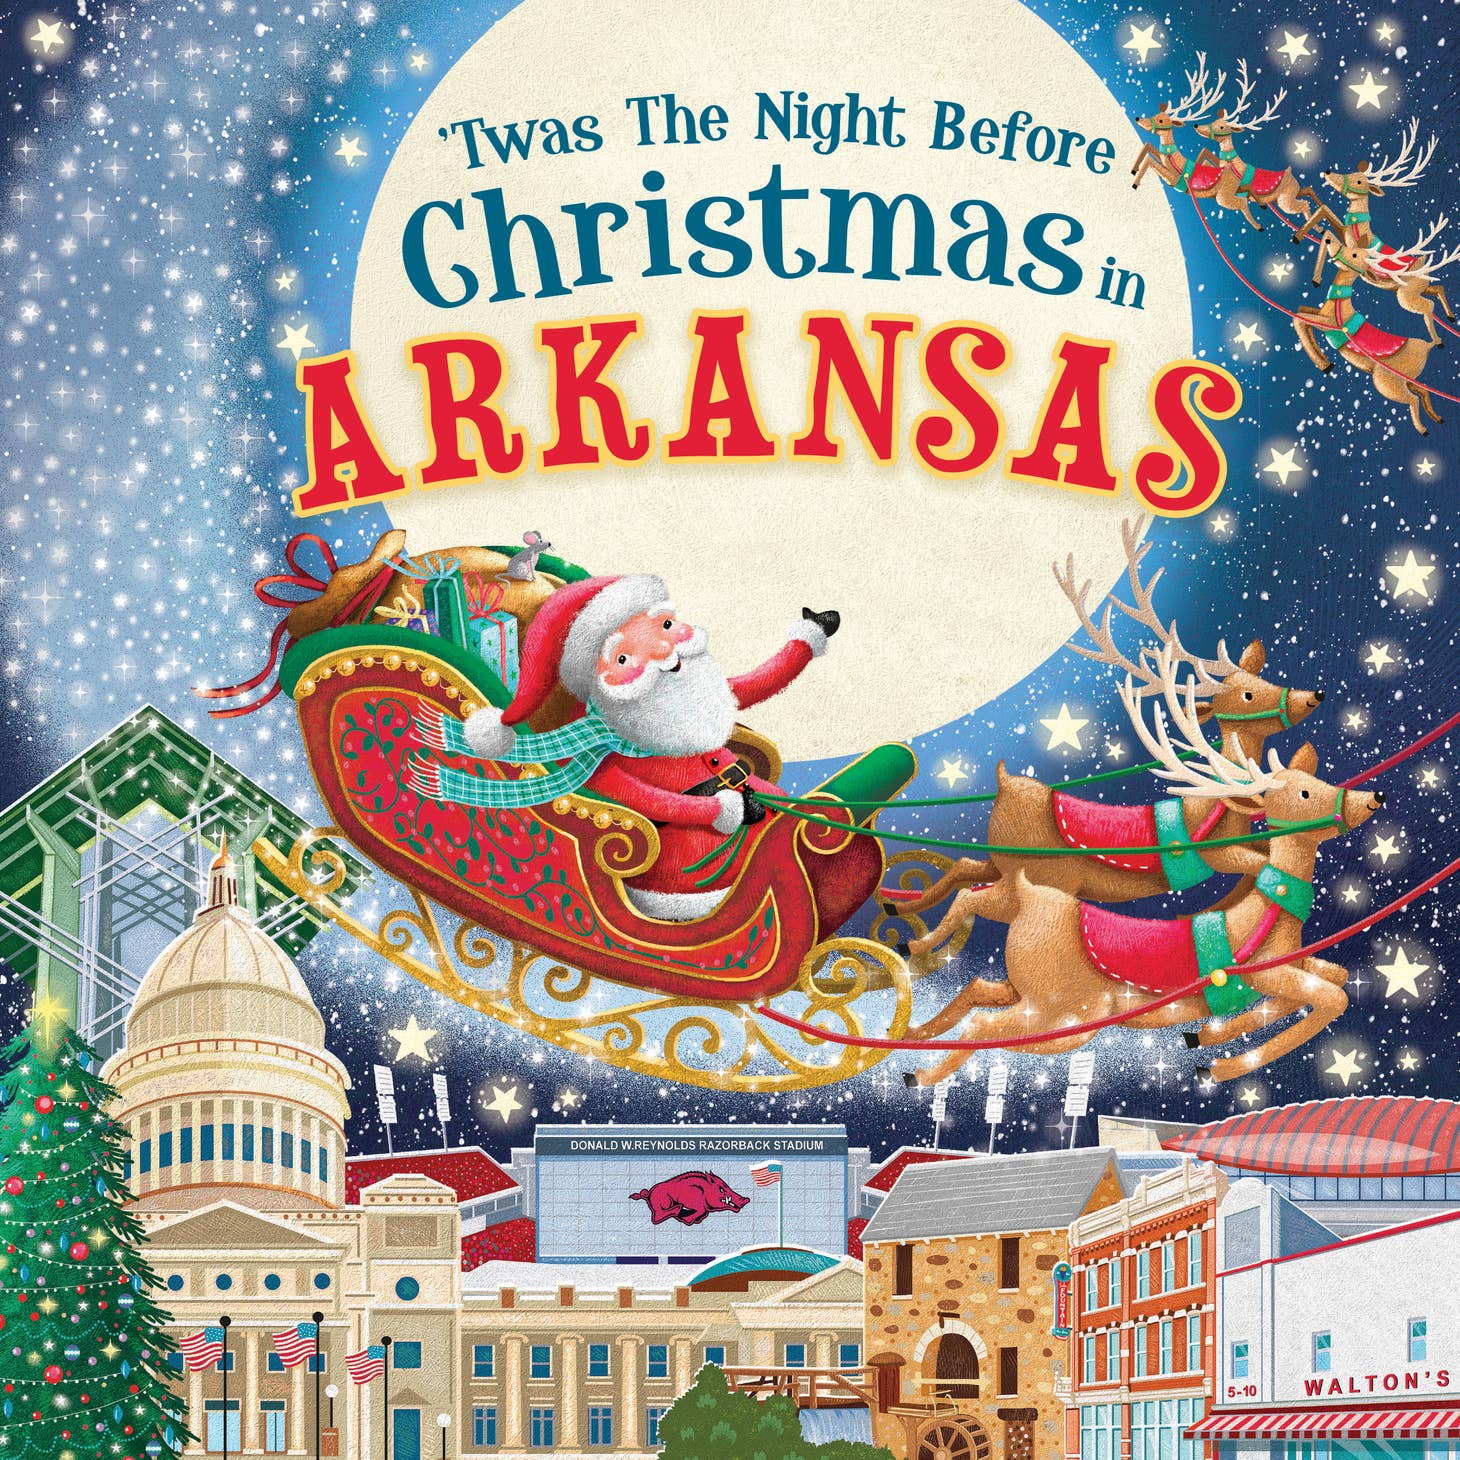 Twas the Night Before Christmas in Arkansas